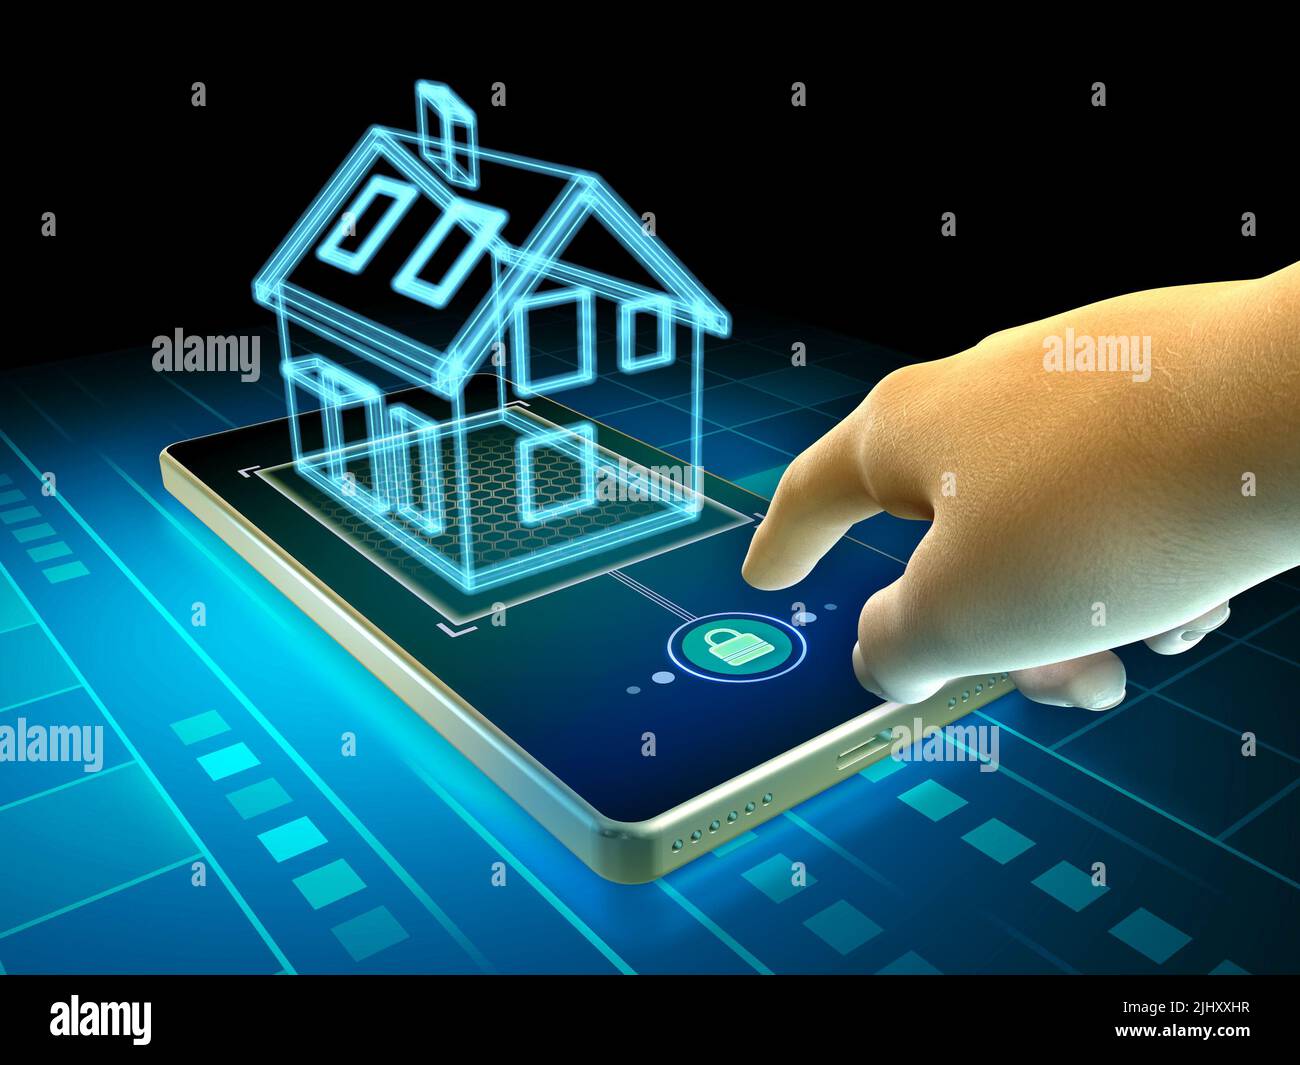 Smartphone app used to control smart home devices Stock Photo